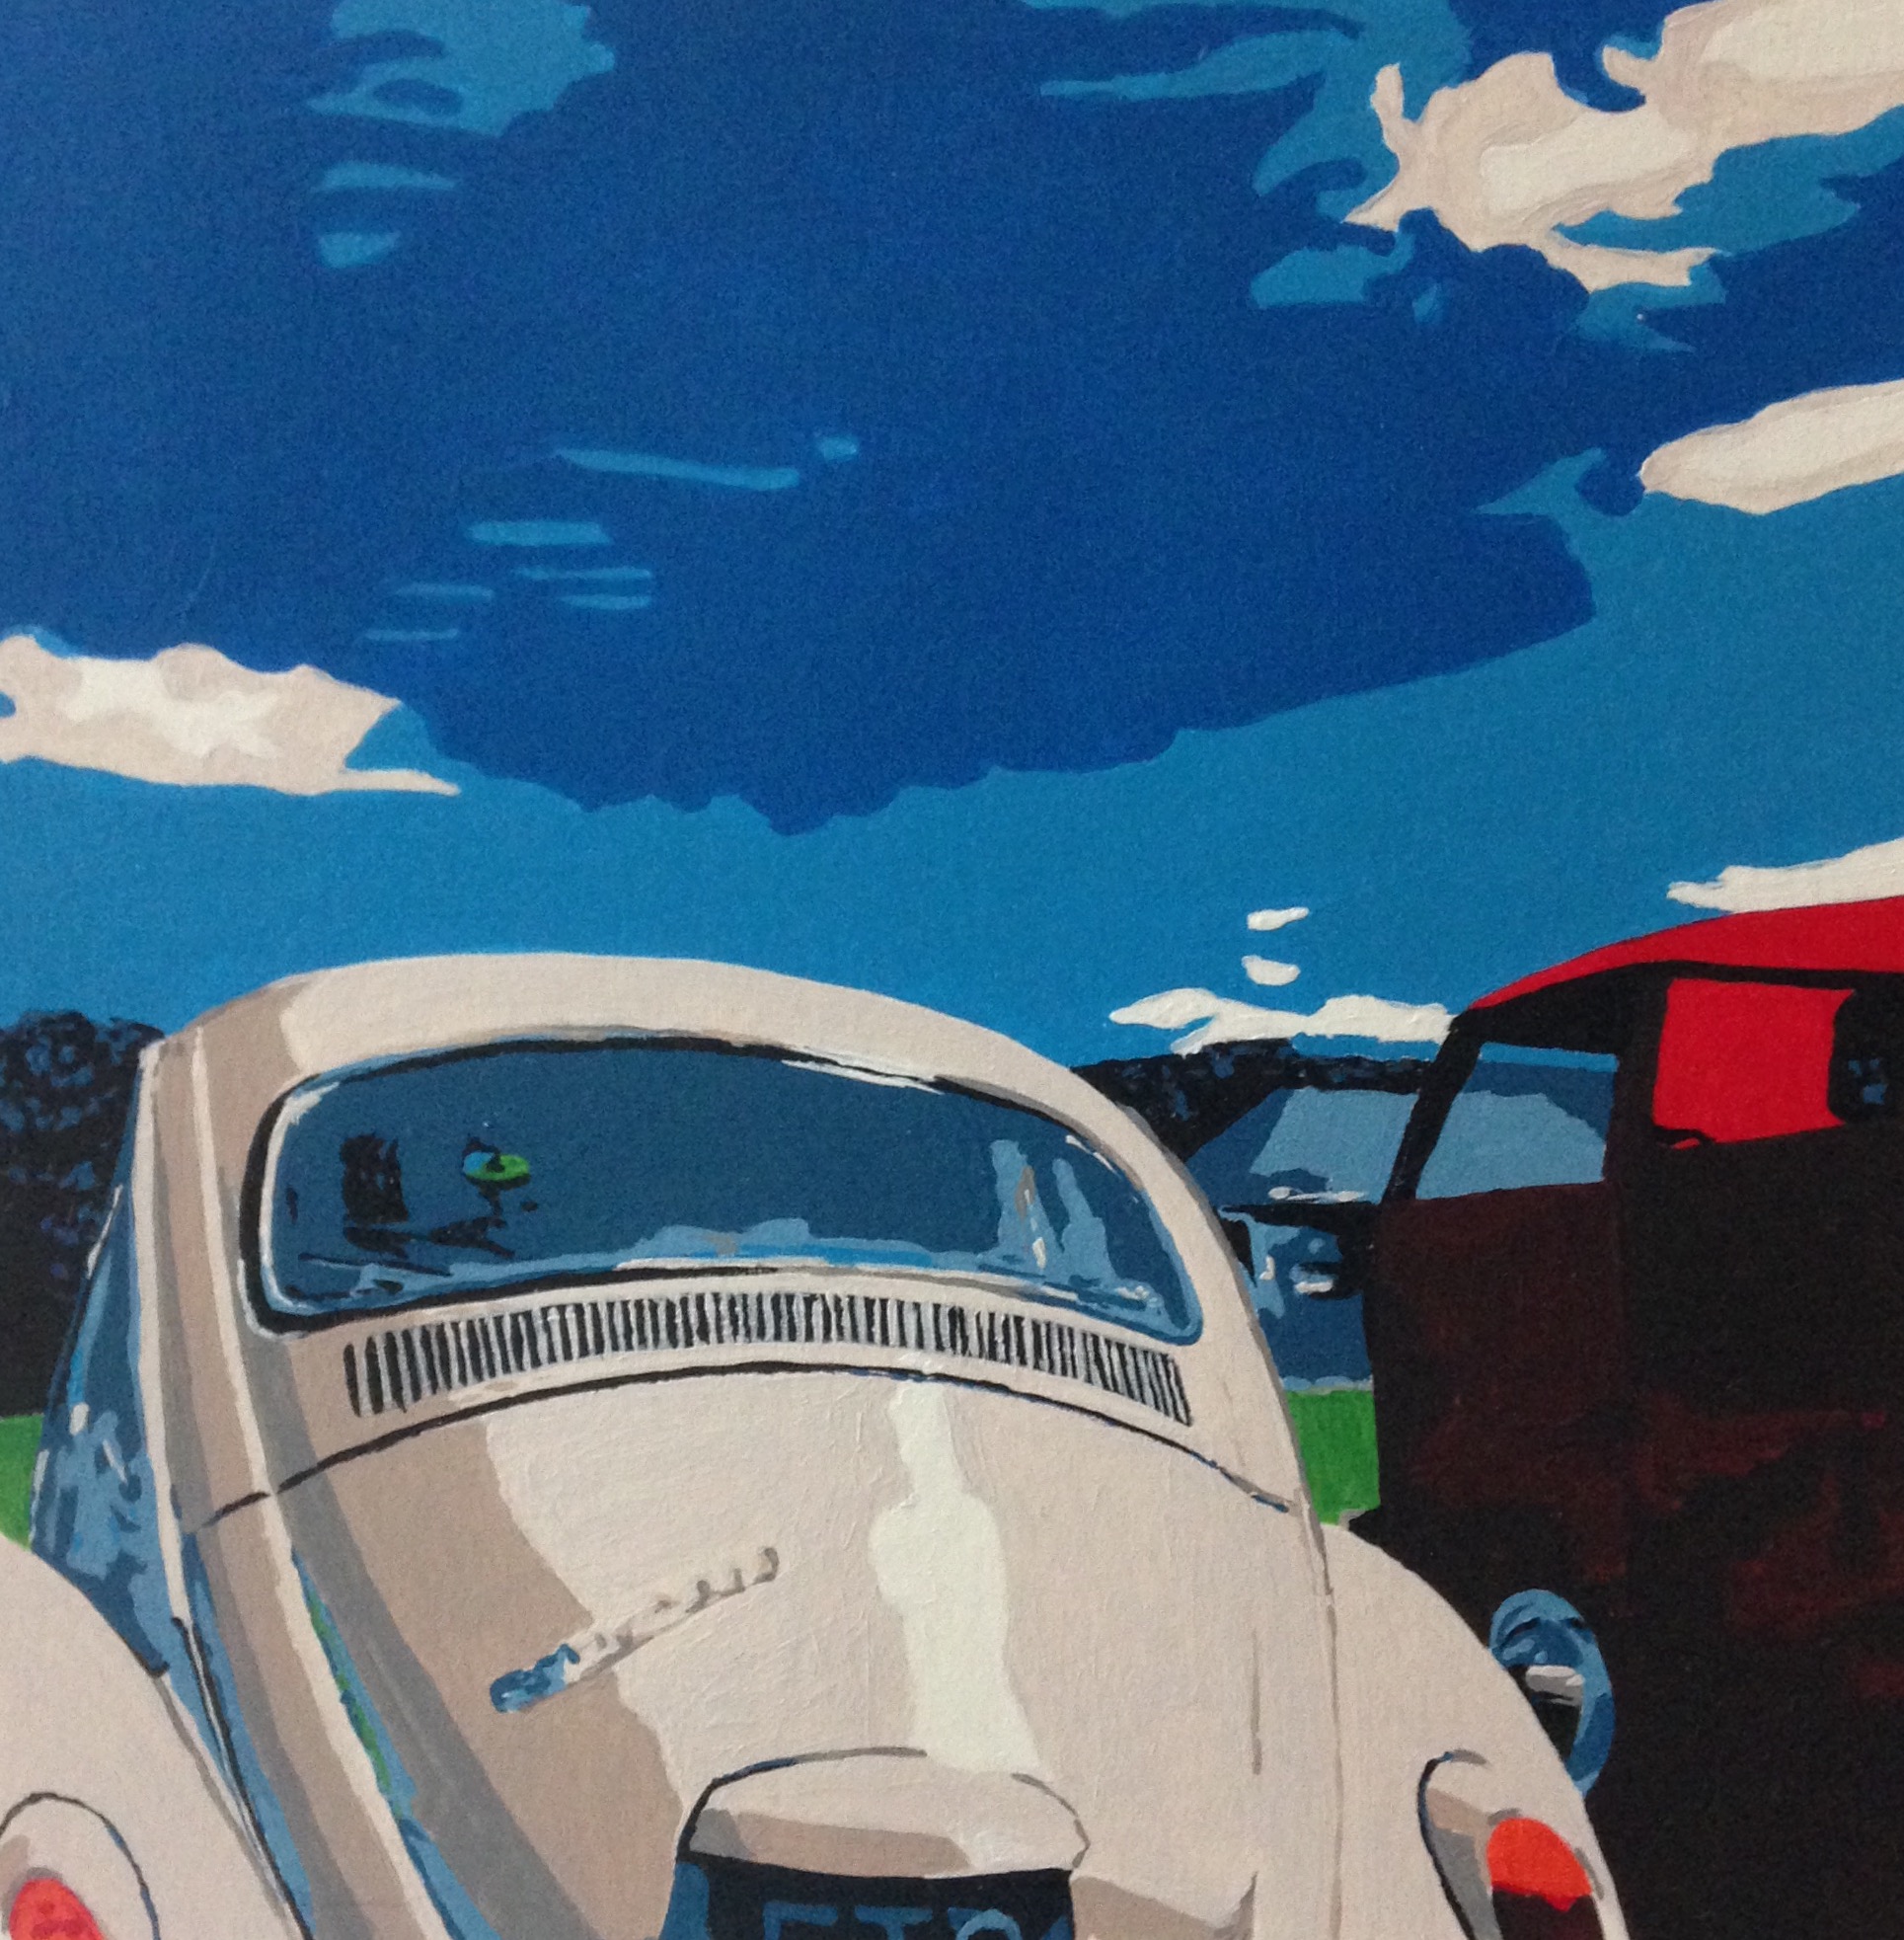 VW Beetle pen and ink illustration by Louisa Hill